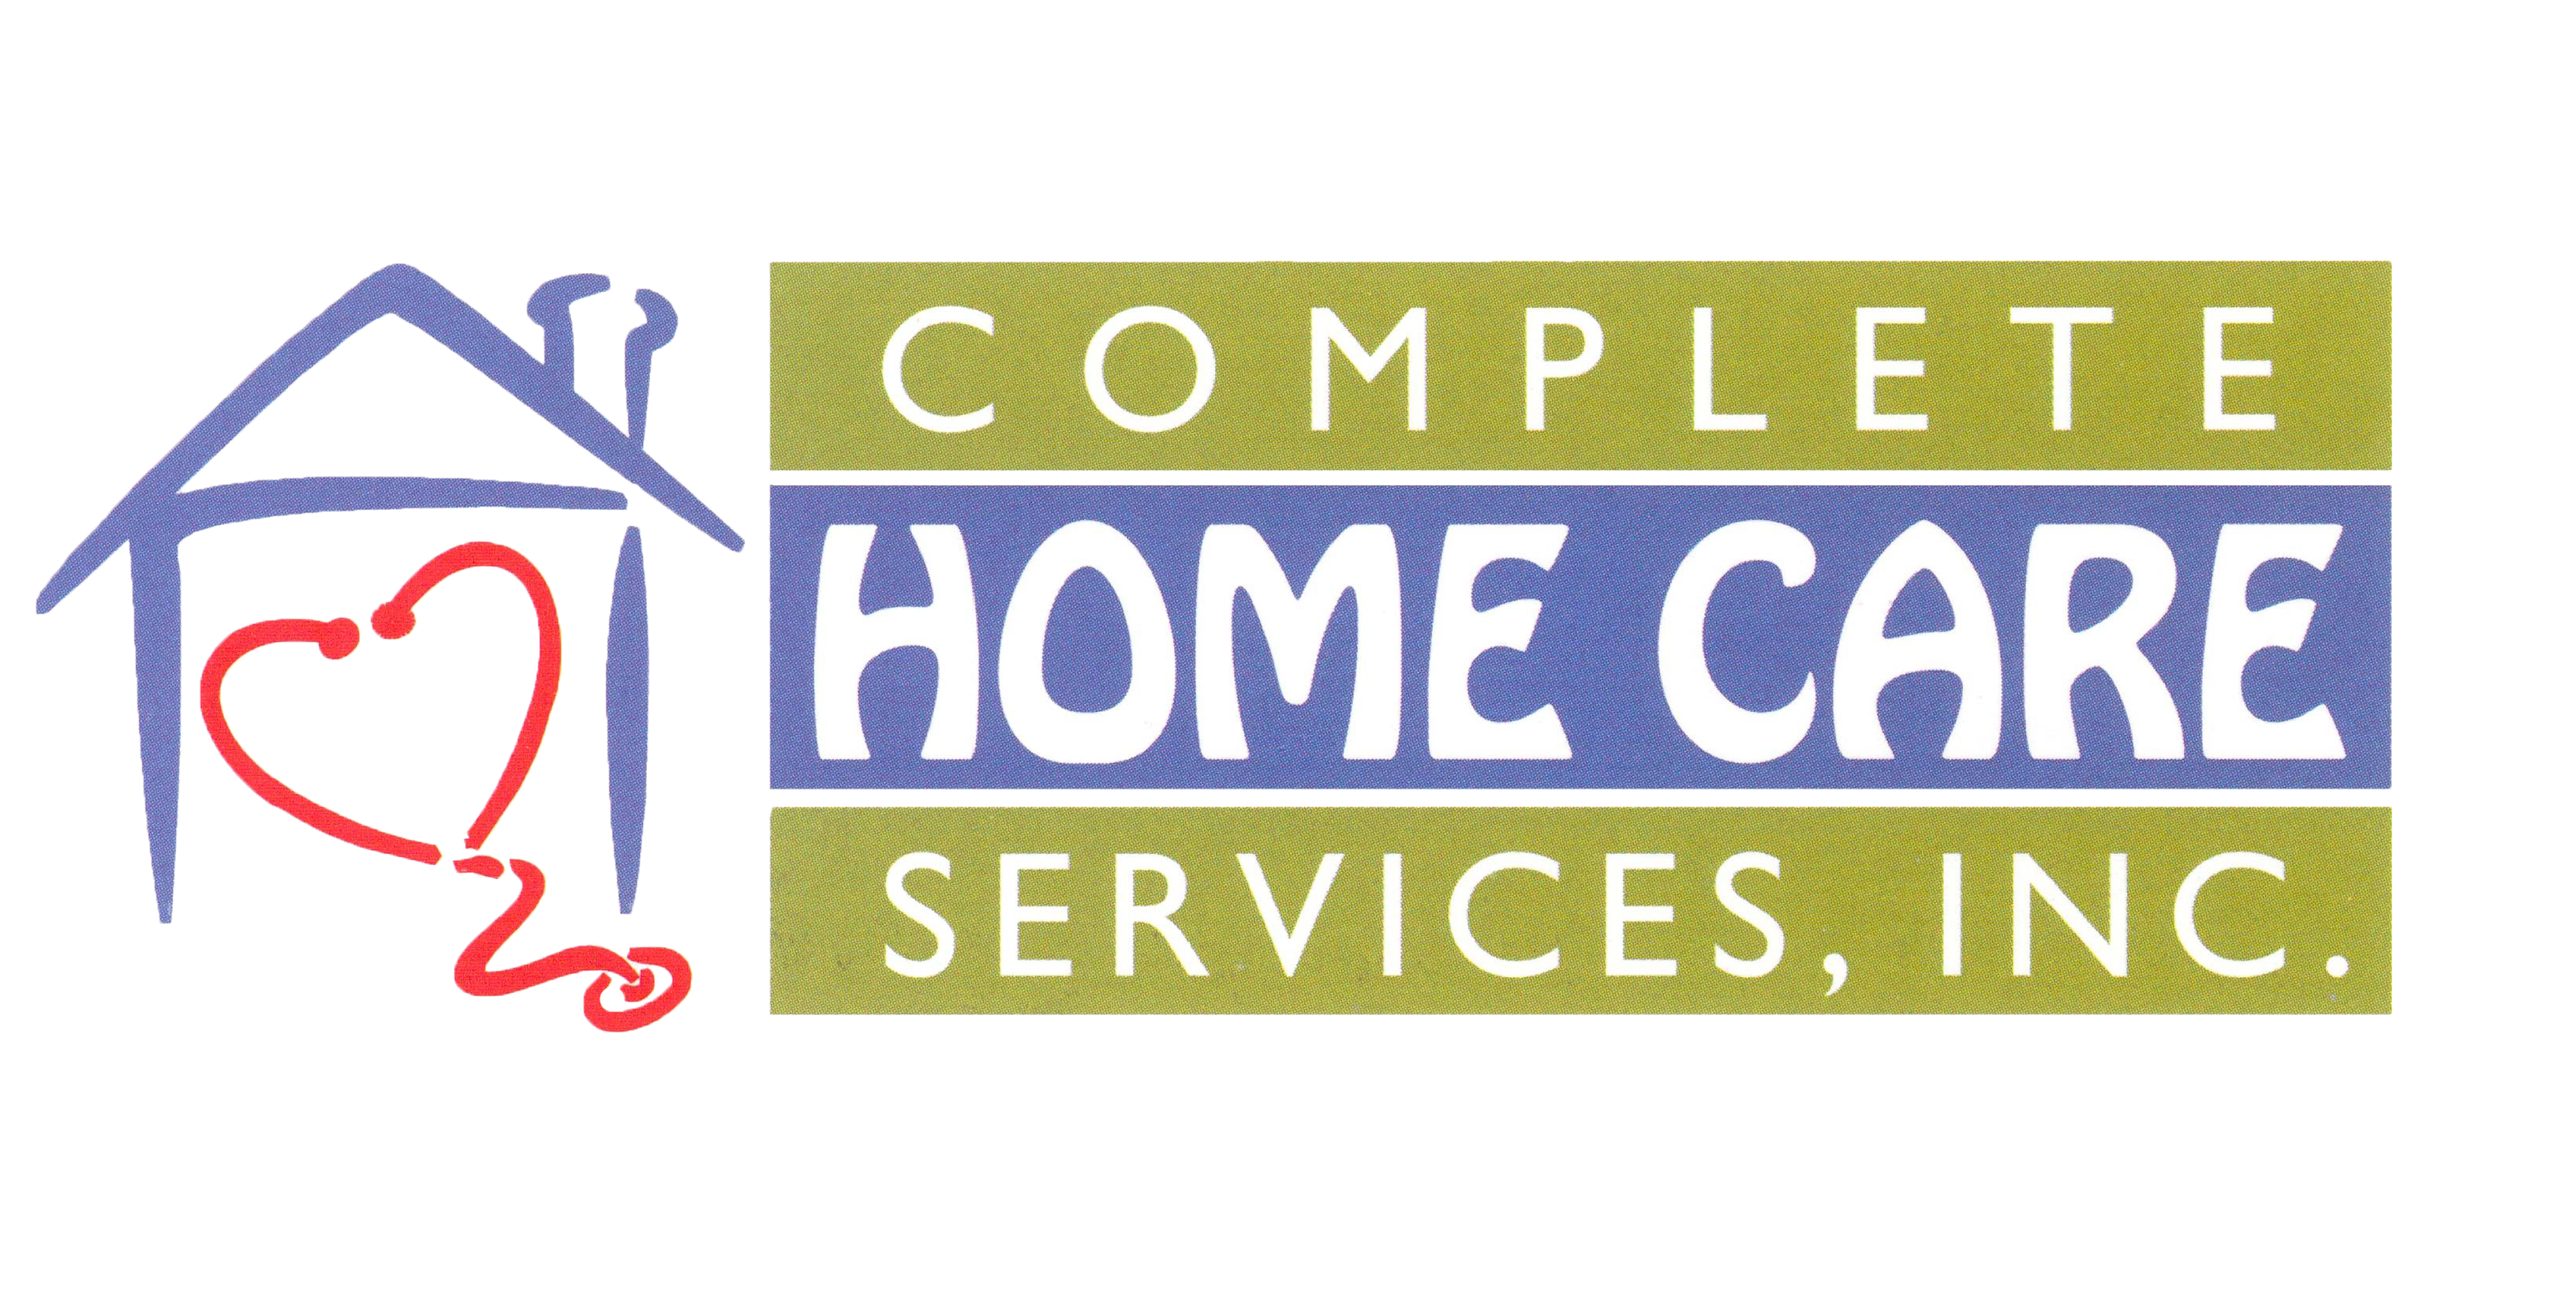 Complete Home Care Services, Inc.